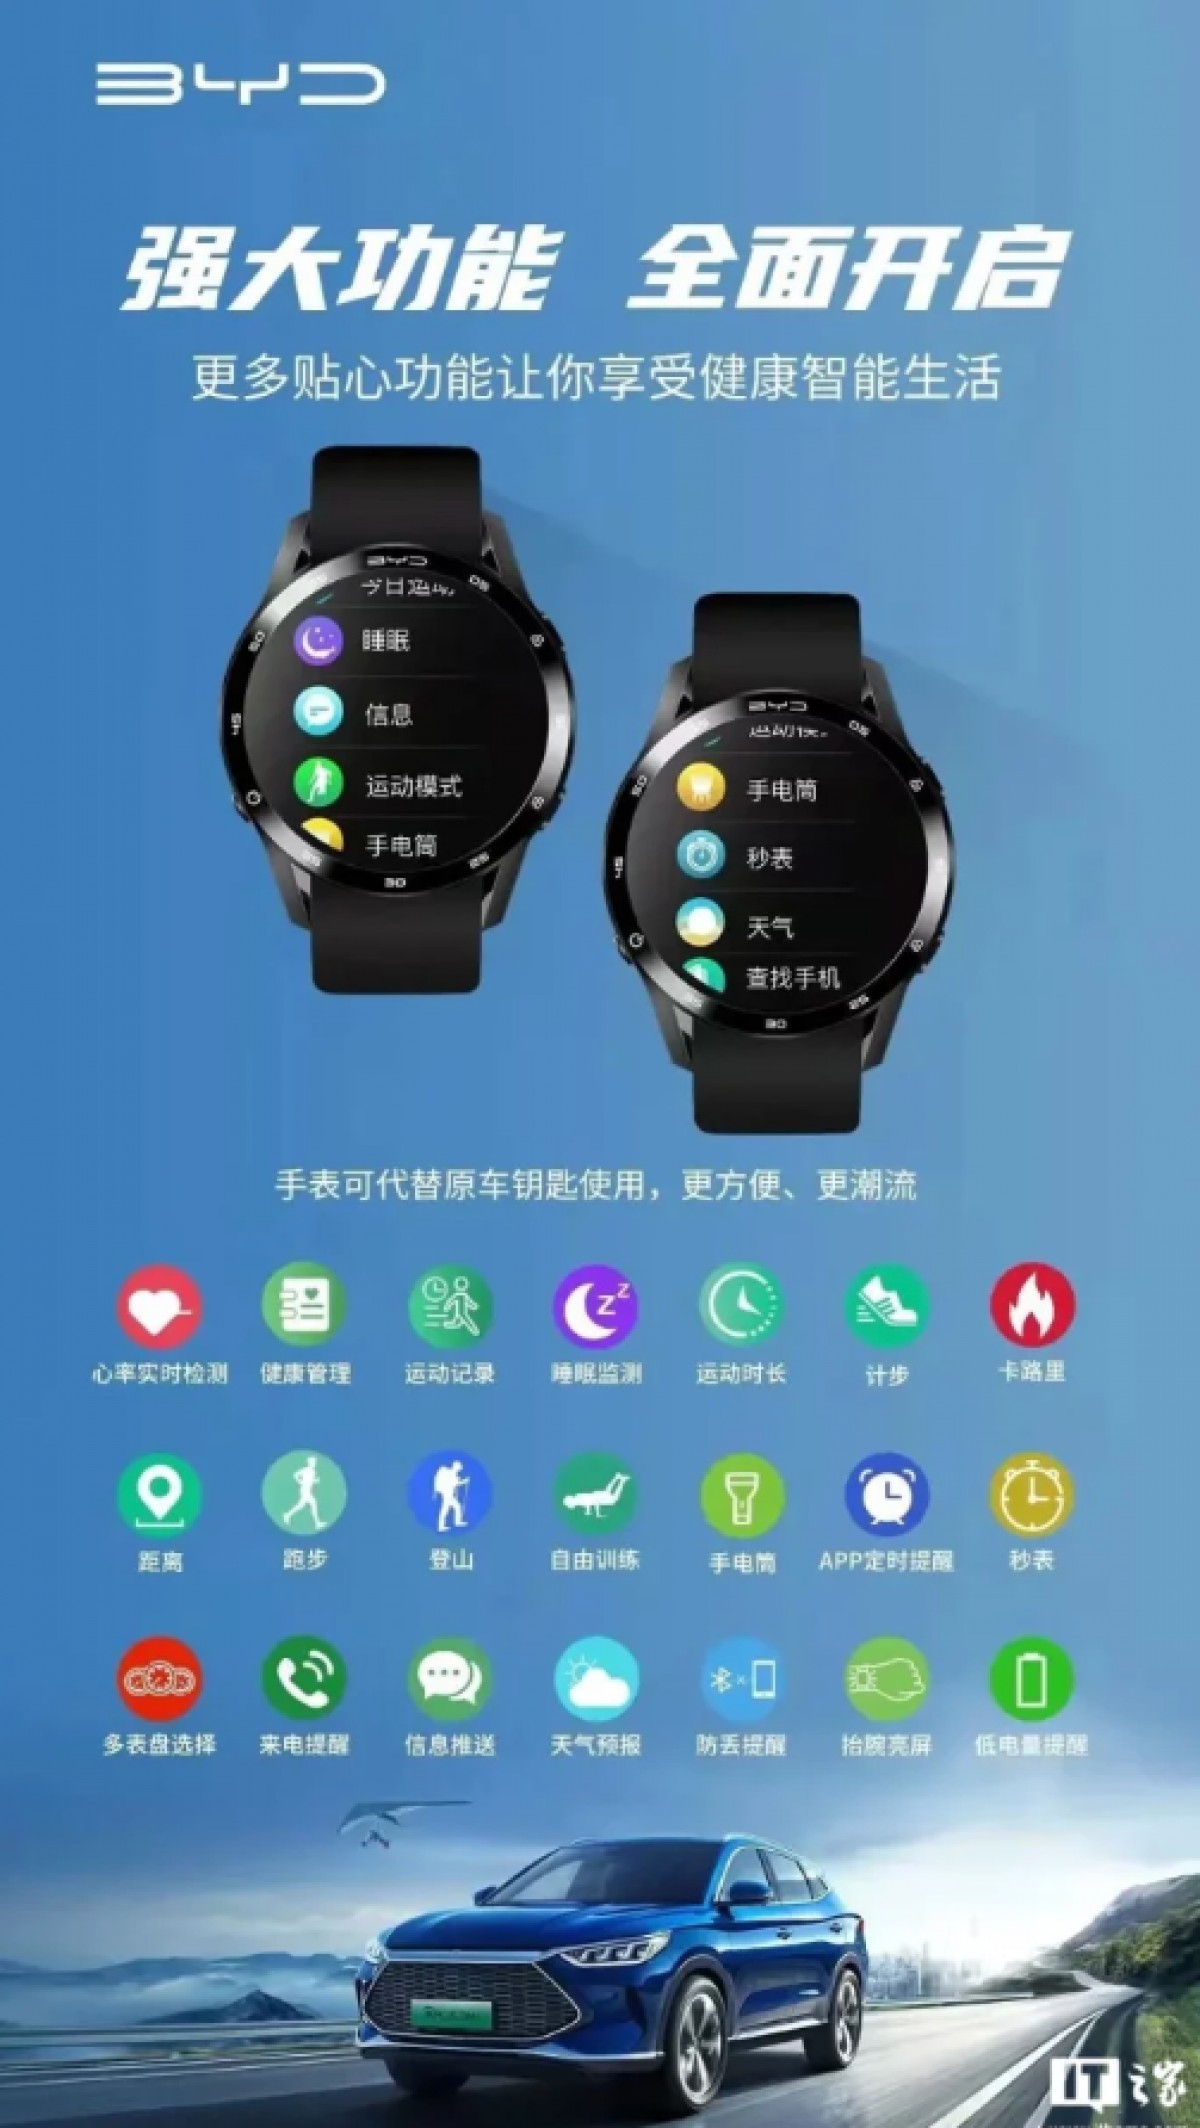 BYD smartwatch poster